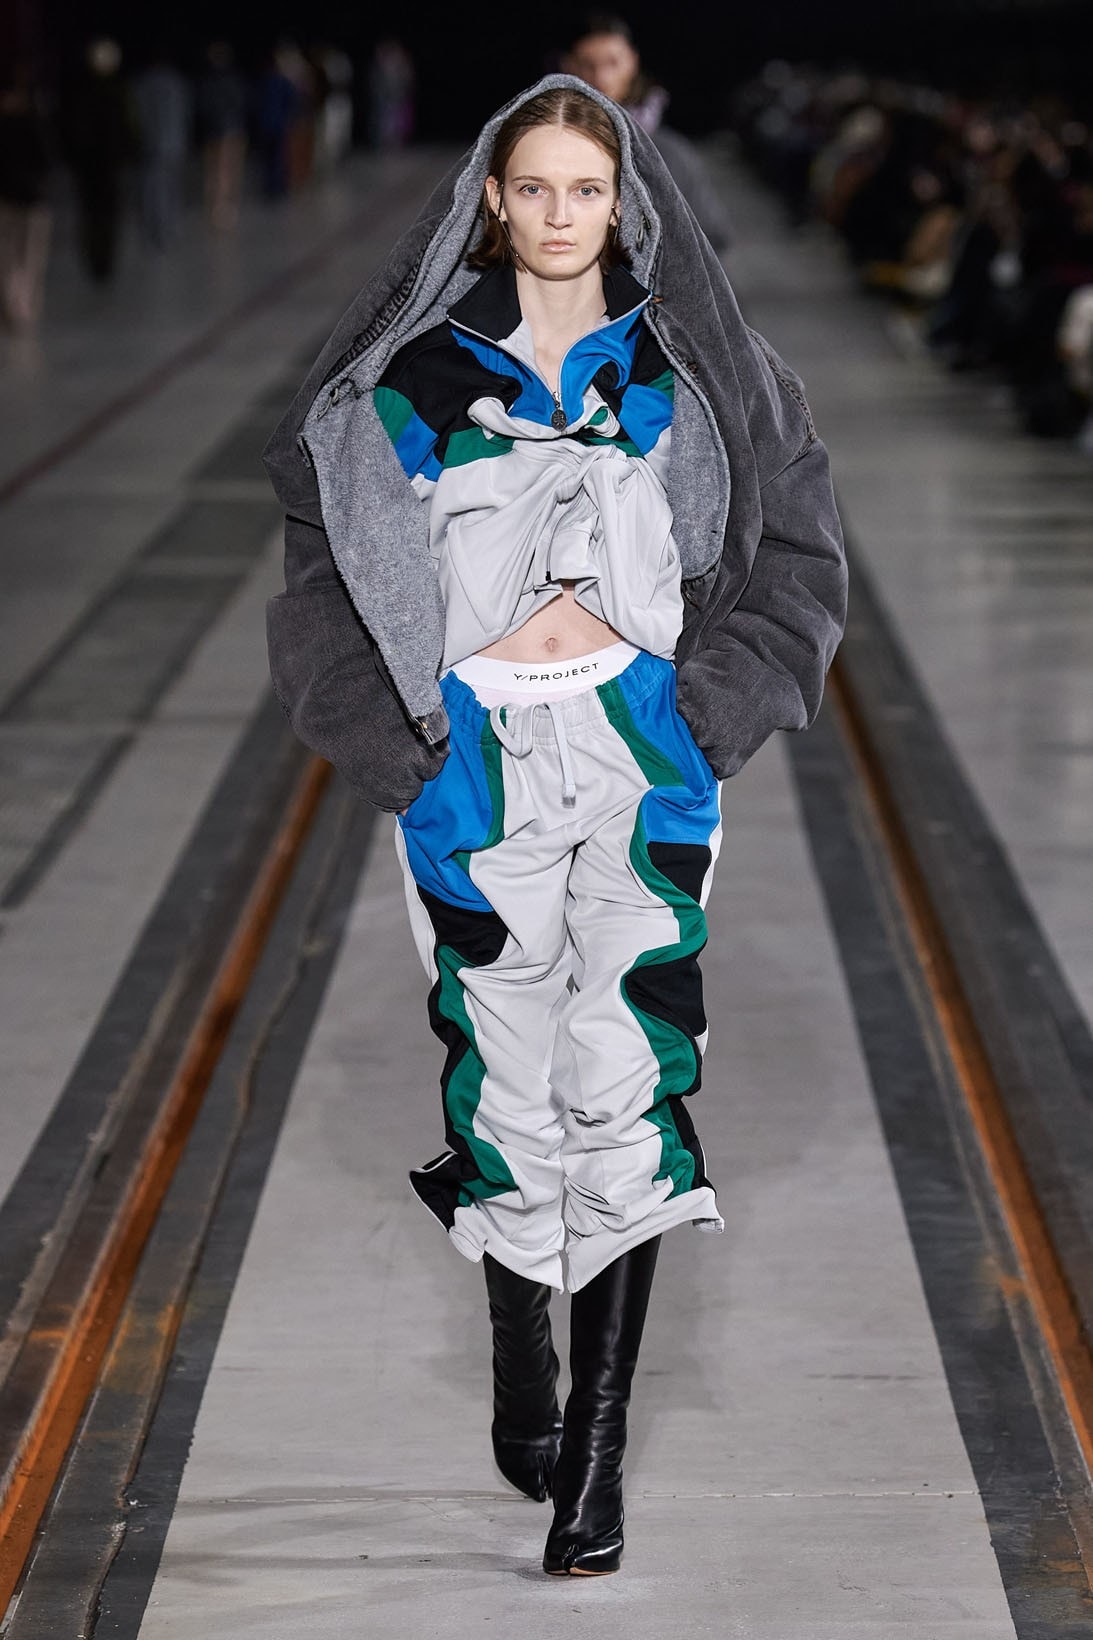 Y/Project Fall/Winter 2022 Paris Fashion Week Runway Show Glenn Martens Jean Paul Gaultier Looks trompe l’oeil Illusion Gender Concepts Queer Camp